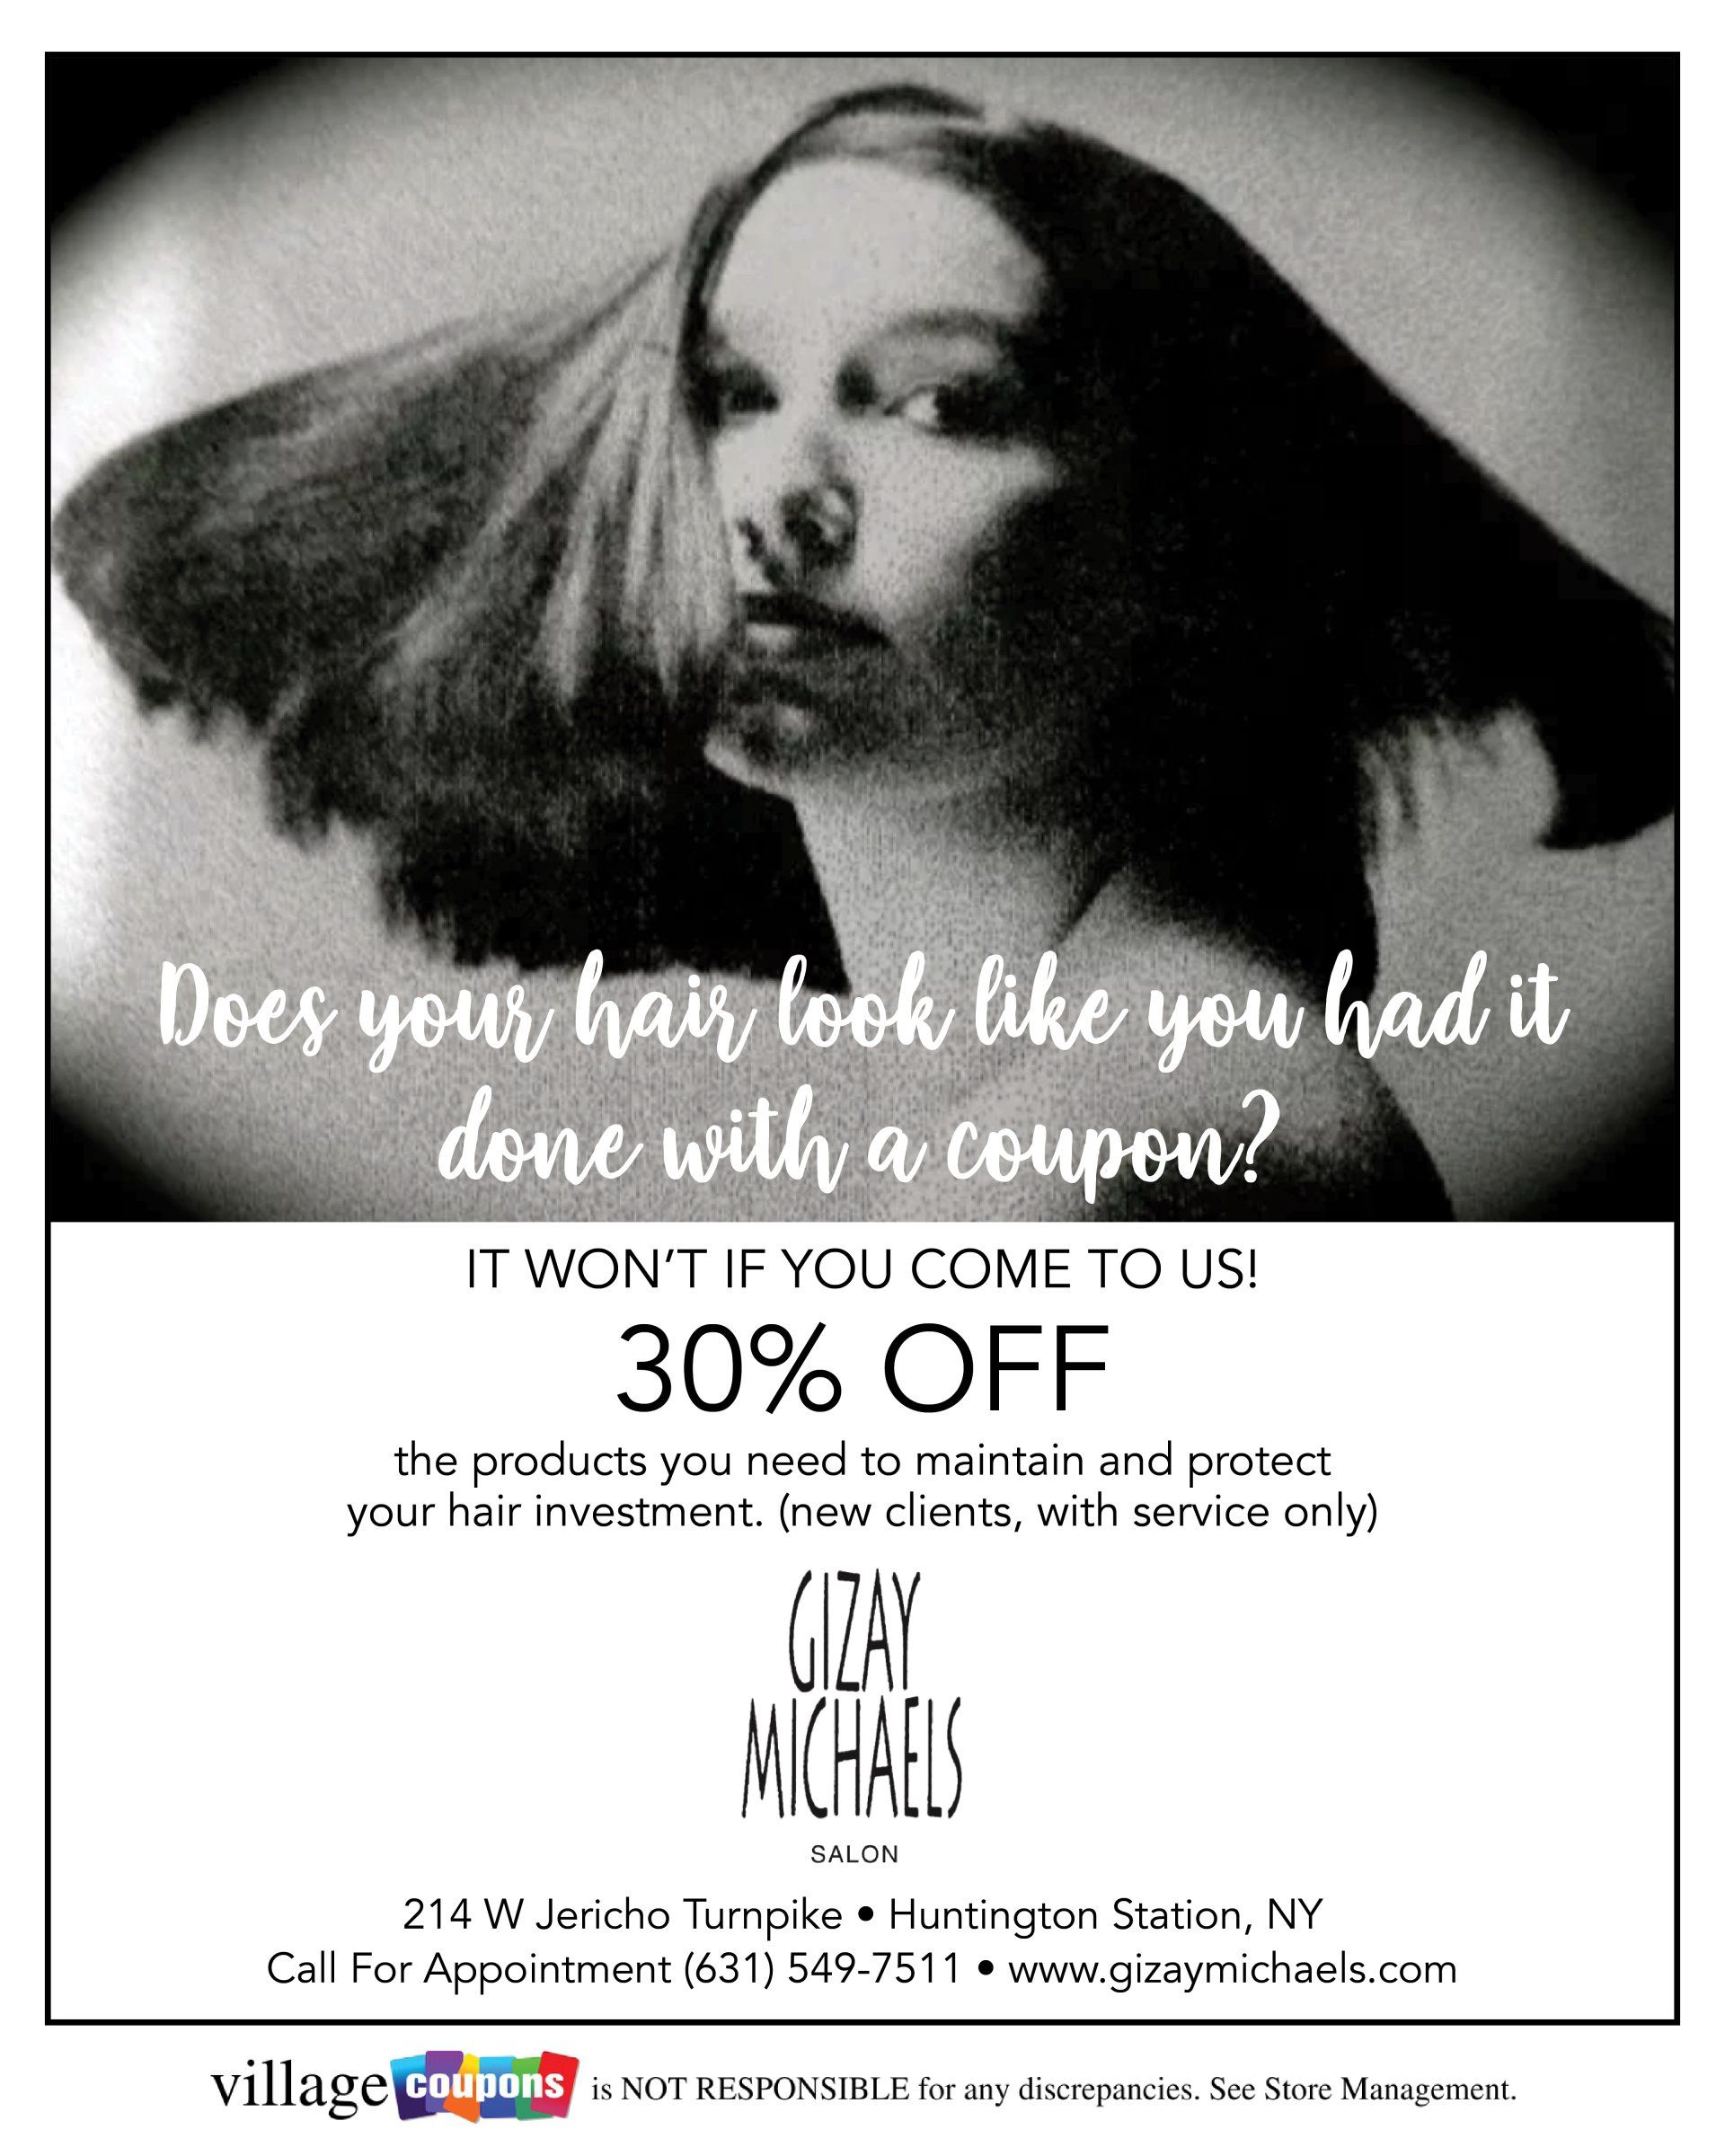 Does your hair look like you had it done with a coupon ?